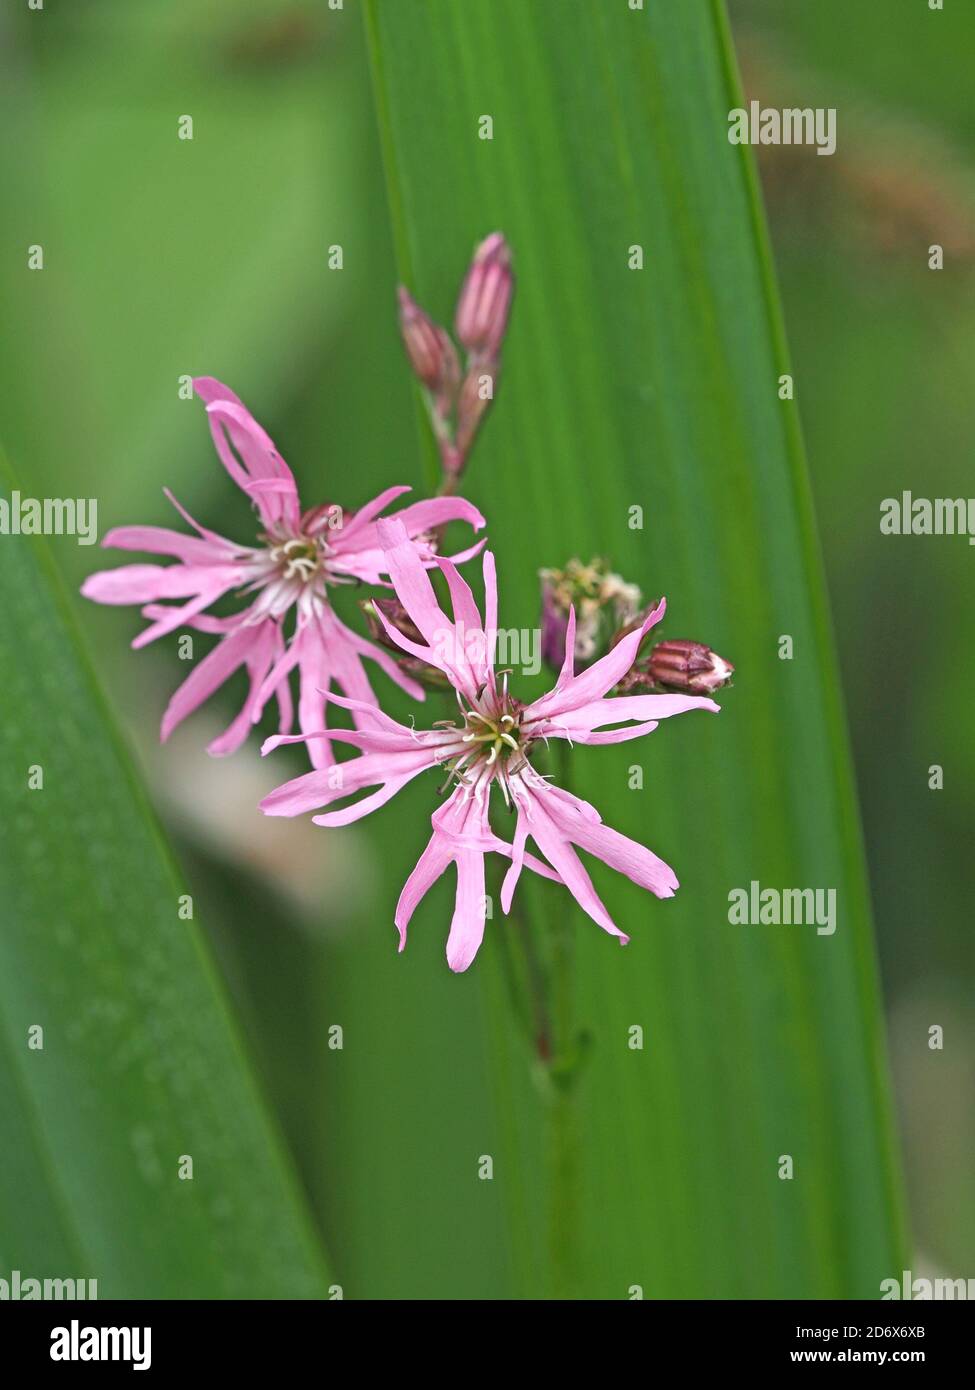 distinctive pink delicate flowers of Ragged Robin (Lychnis flos-cuculi) plant with untidy petals with divided lobes and buds in green meadow Stock Photo